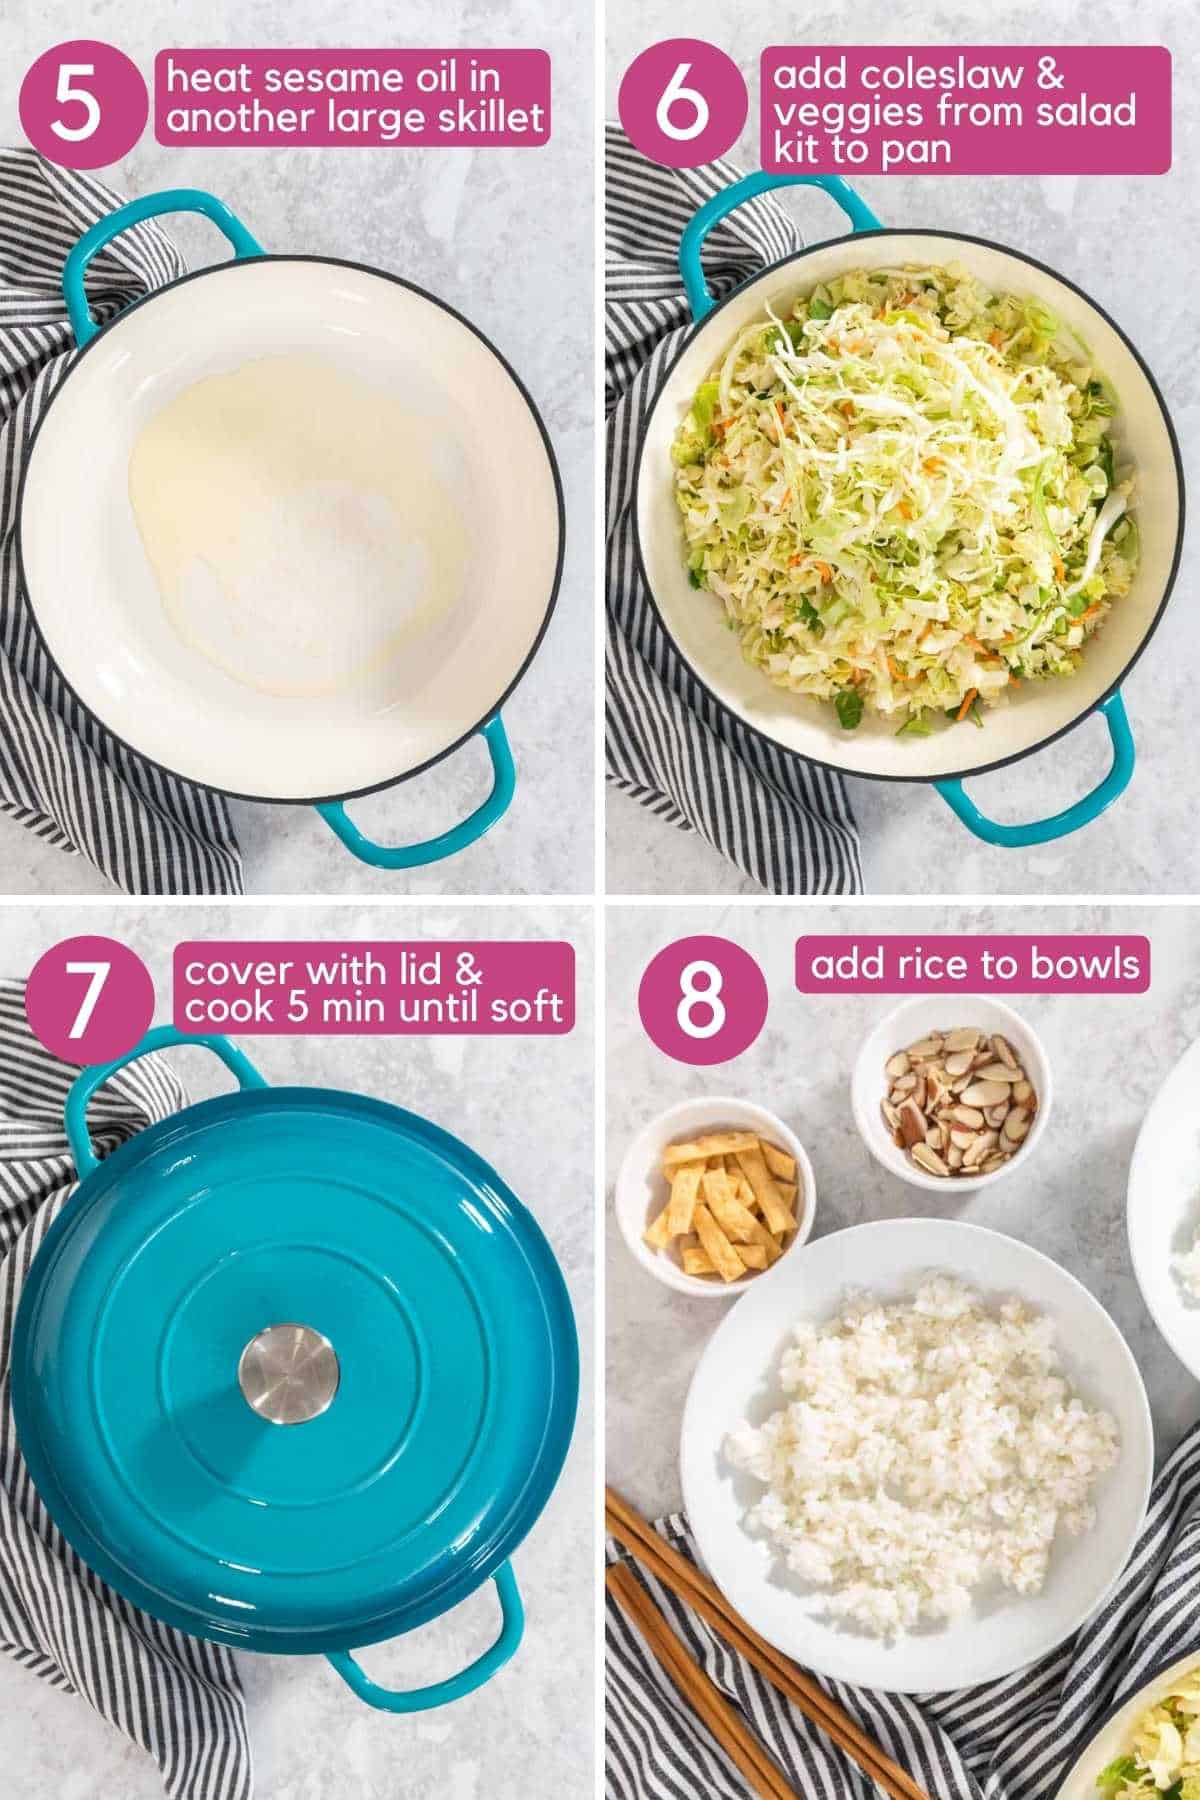 Adding coleslaw, veggies, and rice to a dutch oven to cook.